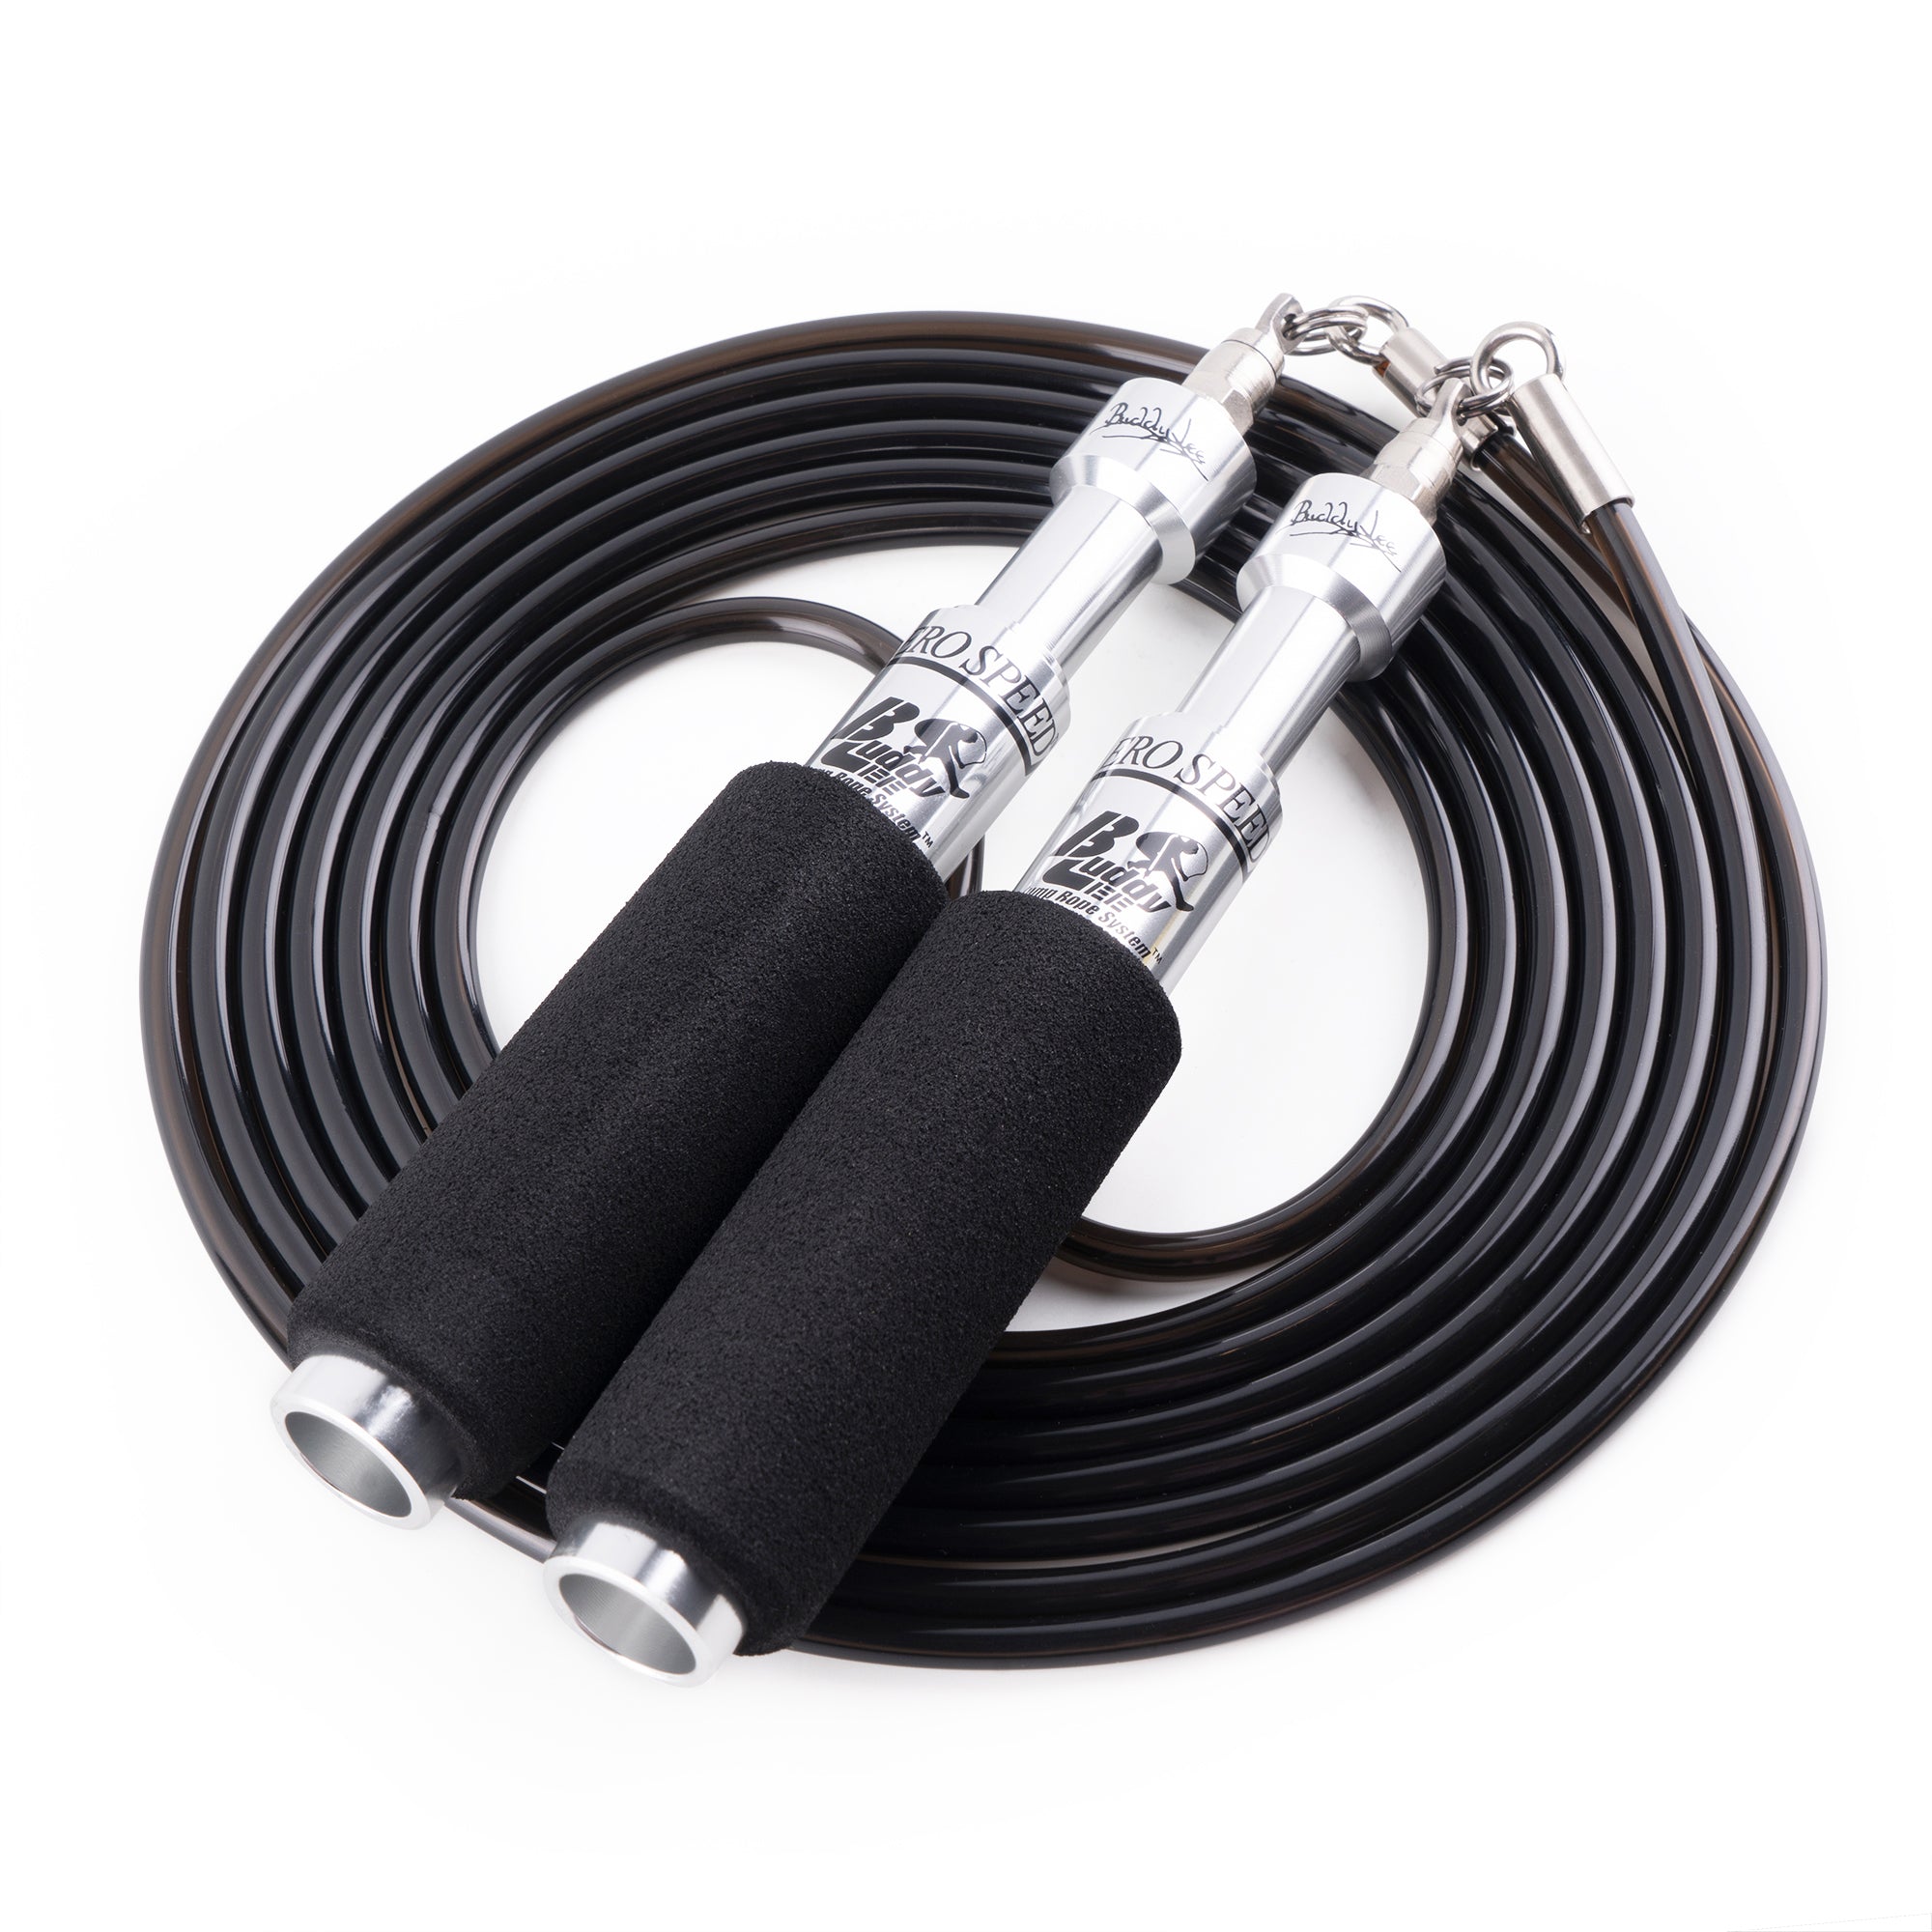 Aero Speed Jump Rope - New & Improved with Adjustable Cable Cord